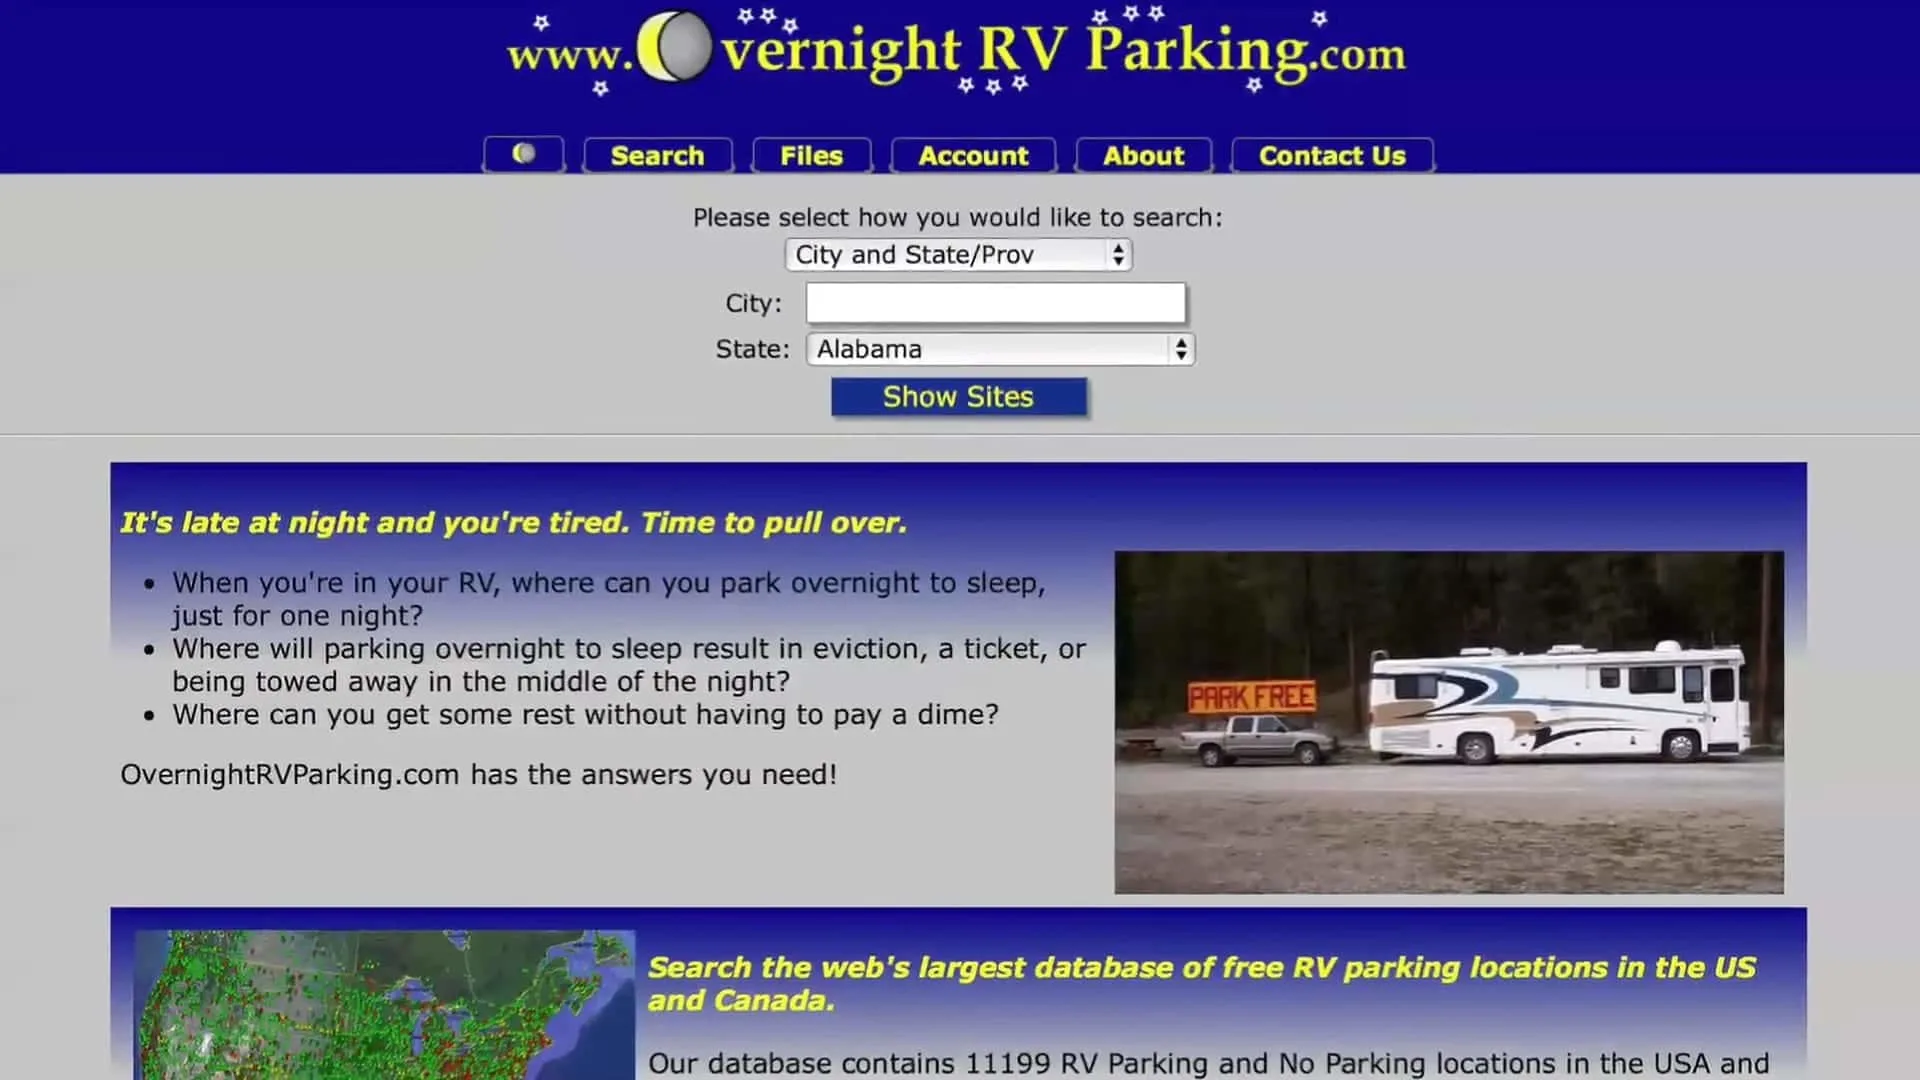 OvernightRVParking, a free app with information on free overnight parking in the US and Canada